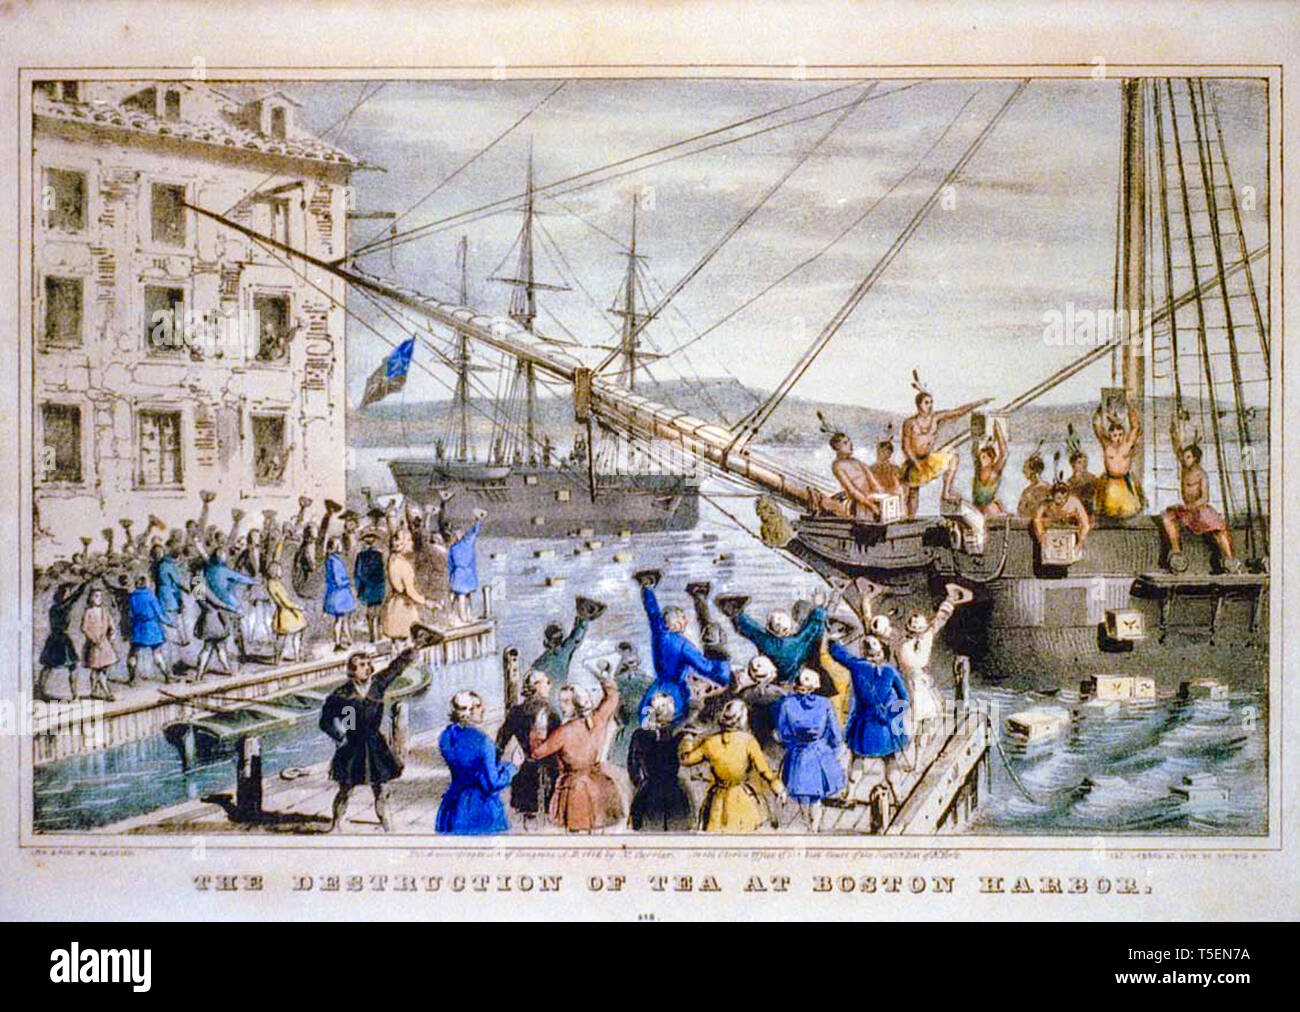 The Destruction of Tea at Boston Harbor, hand coloured engraving depicting the 1773 Boston Tea Party, Nathaniel Currier,1846 Stock Photo